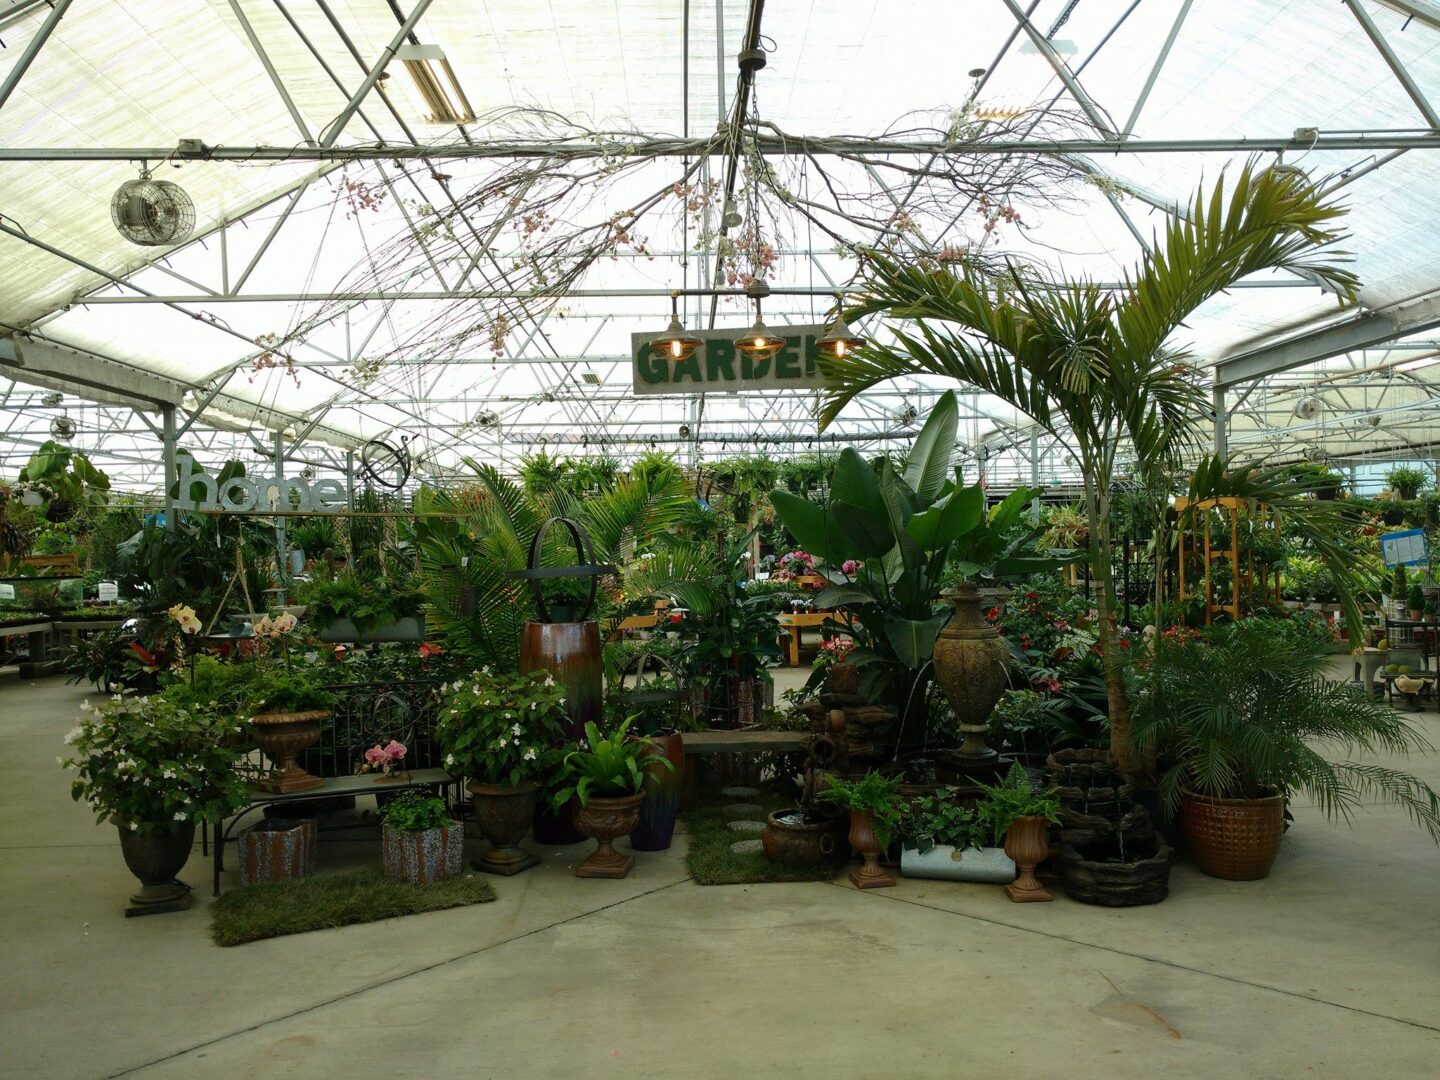 A beautiful display of houseplants at the Great Big Greenhouse